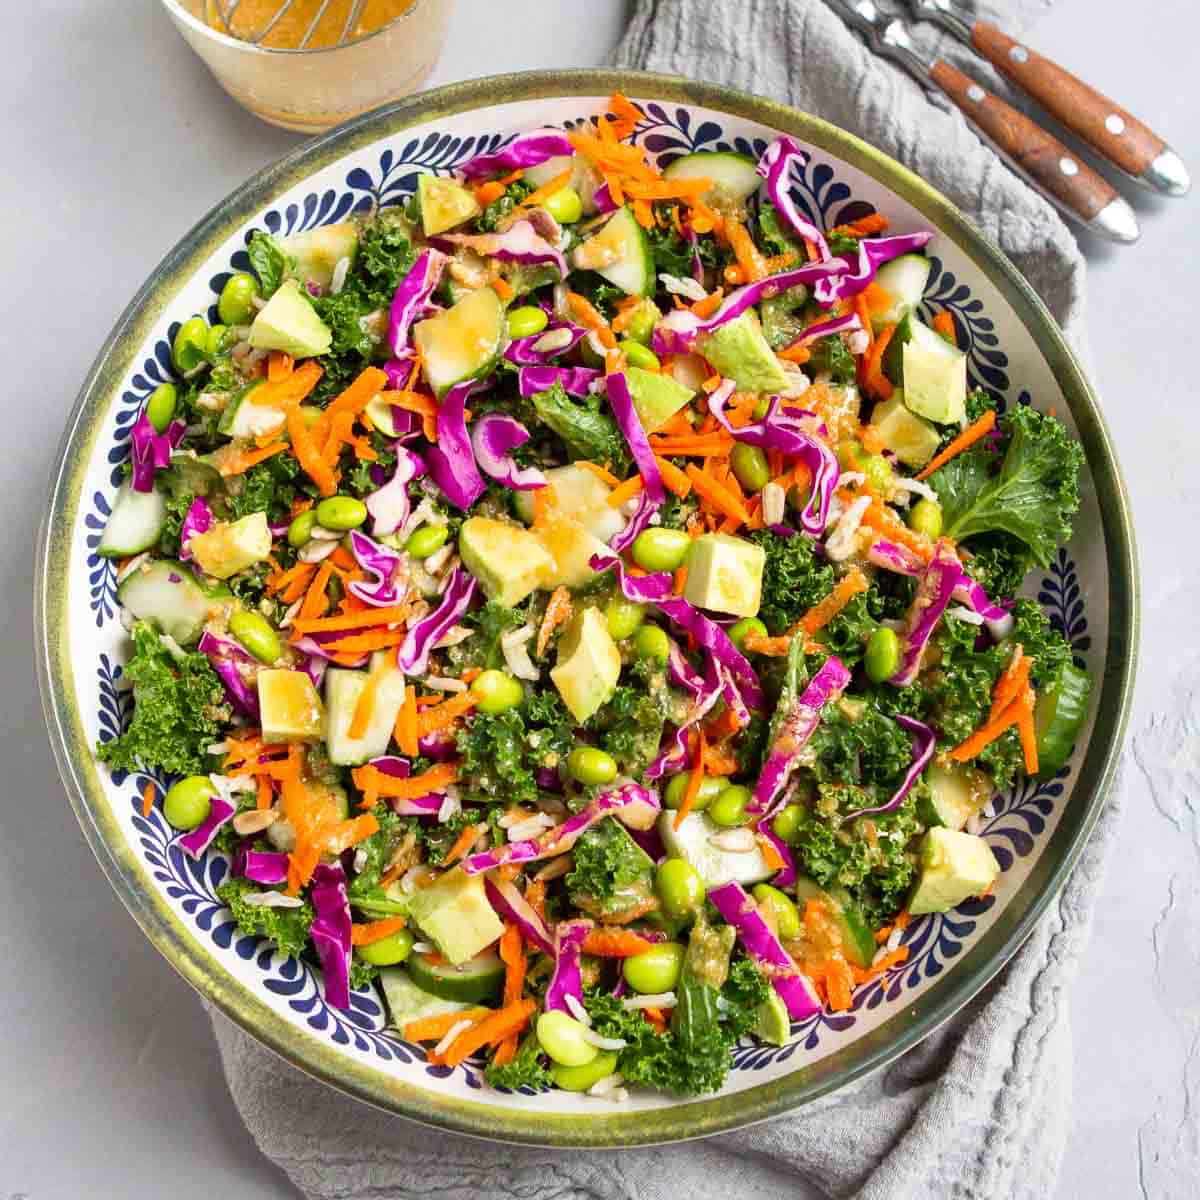 Kale salad with avocado, cabbage rice and other vegetables in a large bowl.